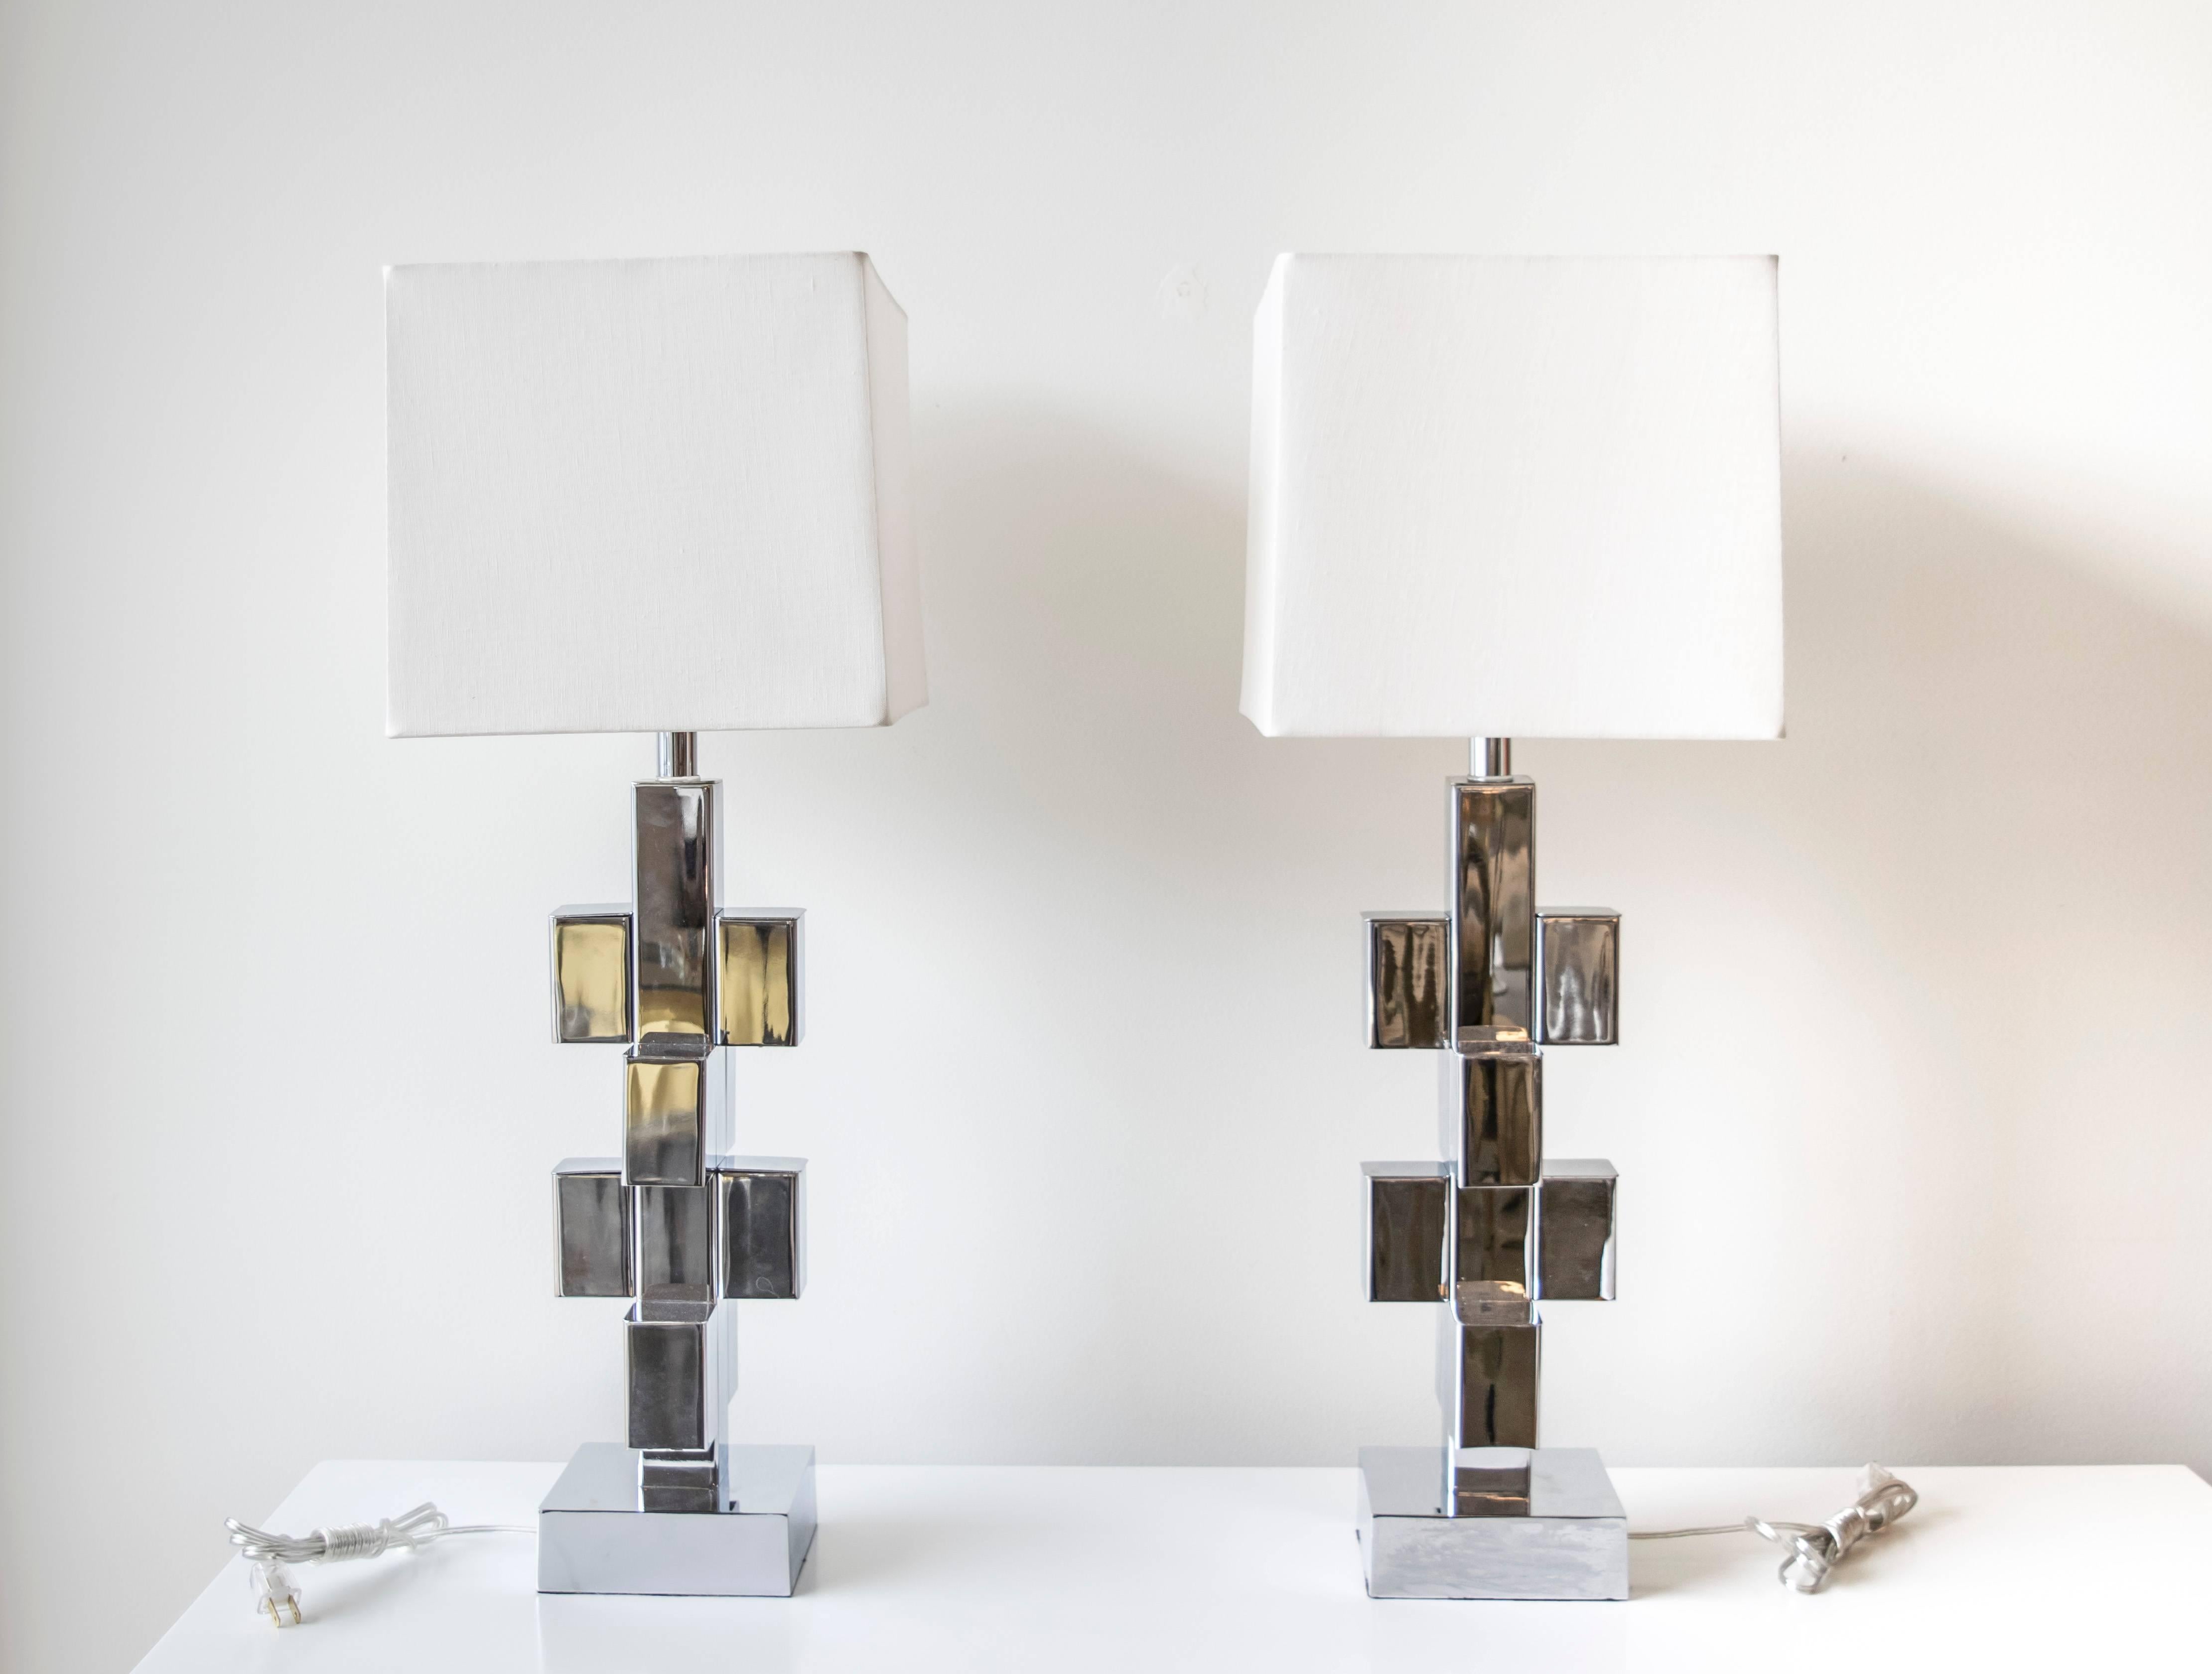 These are extremely rare chrome sculptural three-dimensional lamps that look amazing from any angle. The lamps are very sturdy, well made and without any noticeable marks.